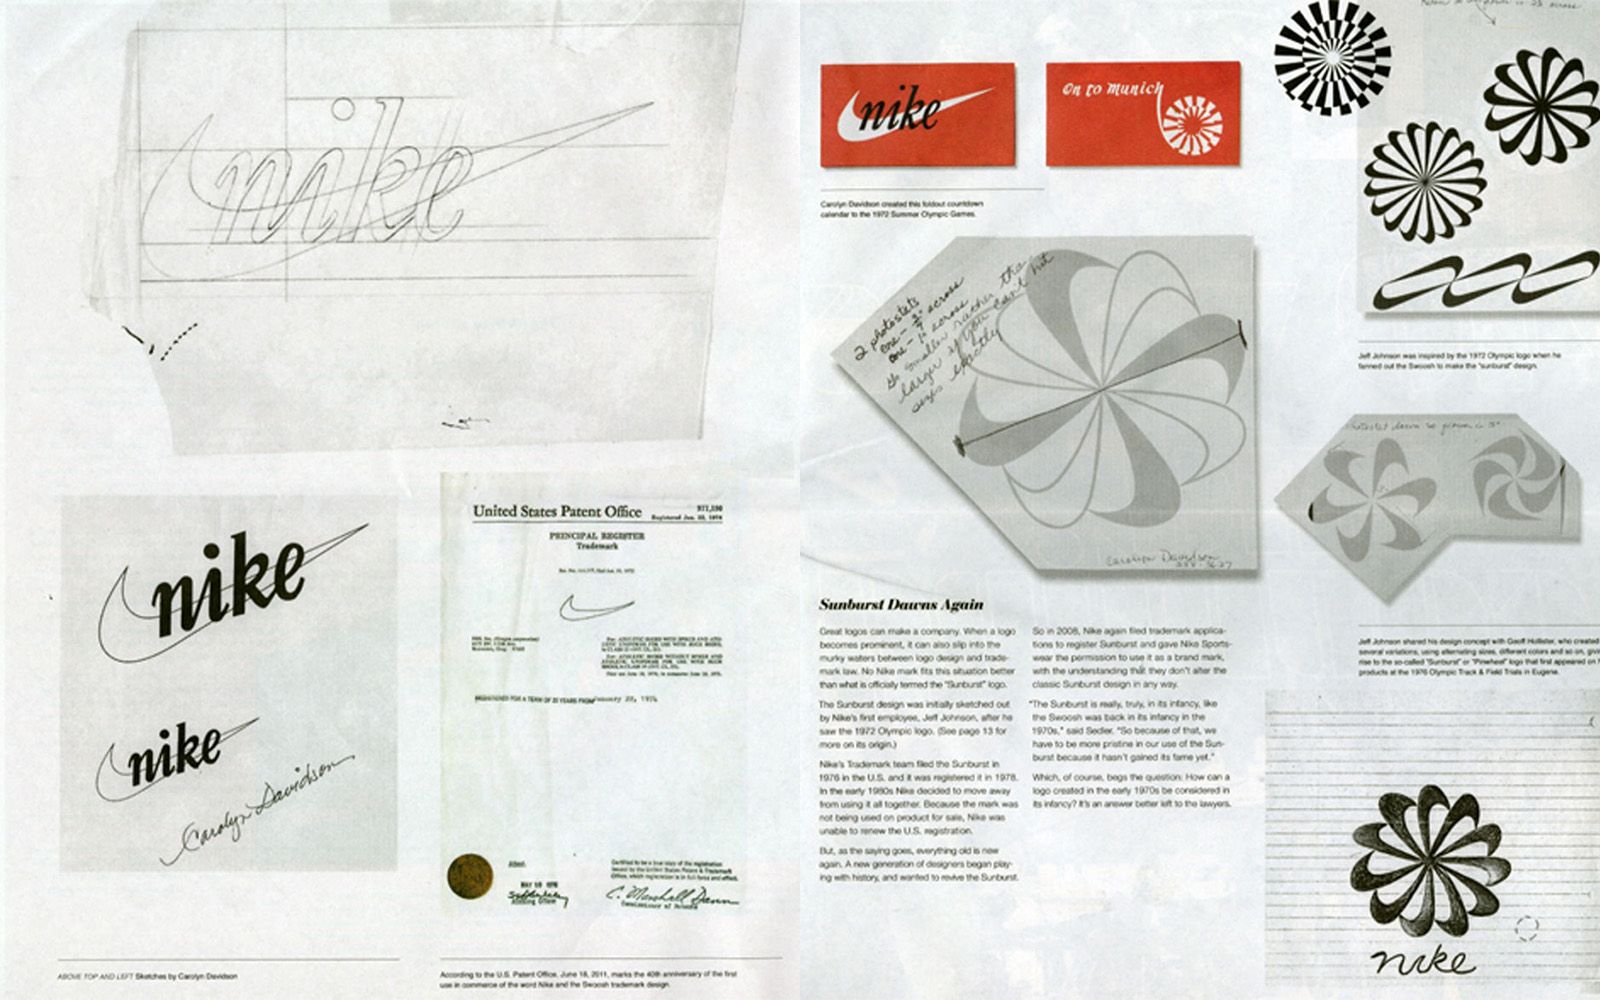 The Nike logo story. Know the story and meaning behind the world